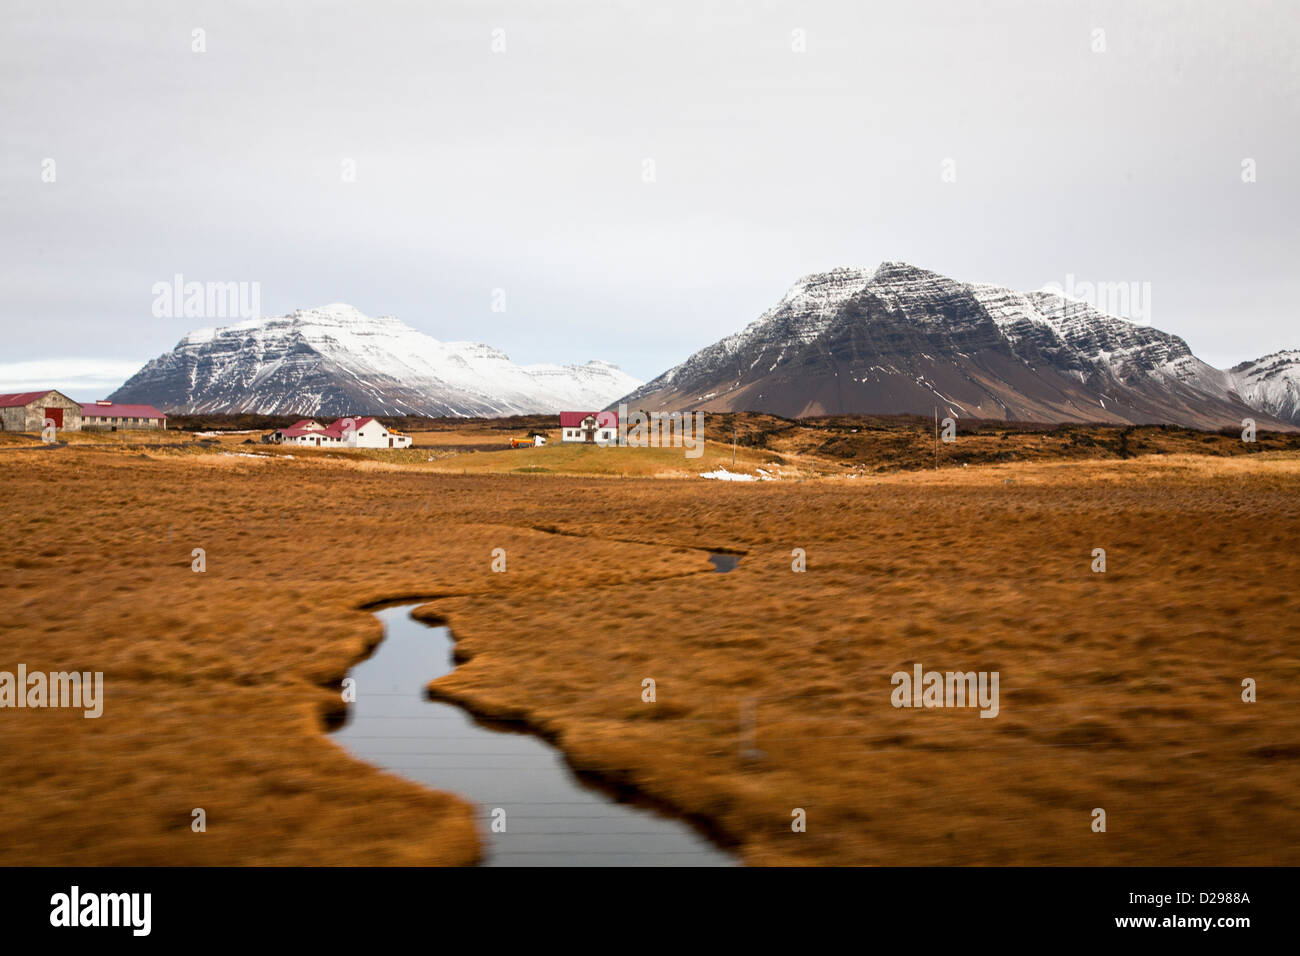 eastern iceland landscape mountains and homes golden grass Stock Photo